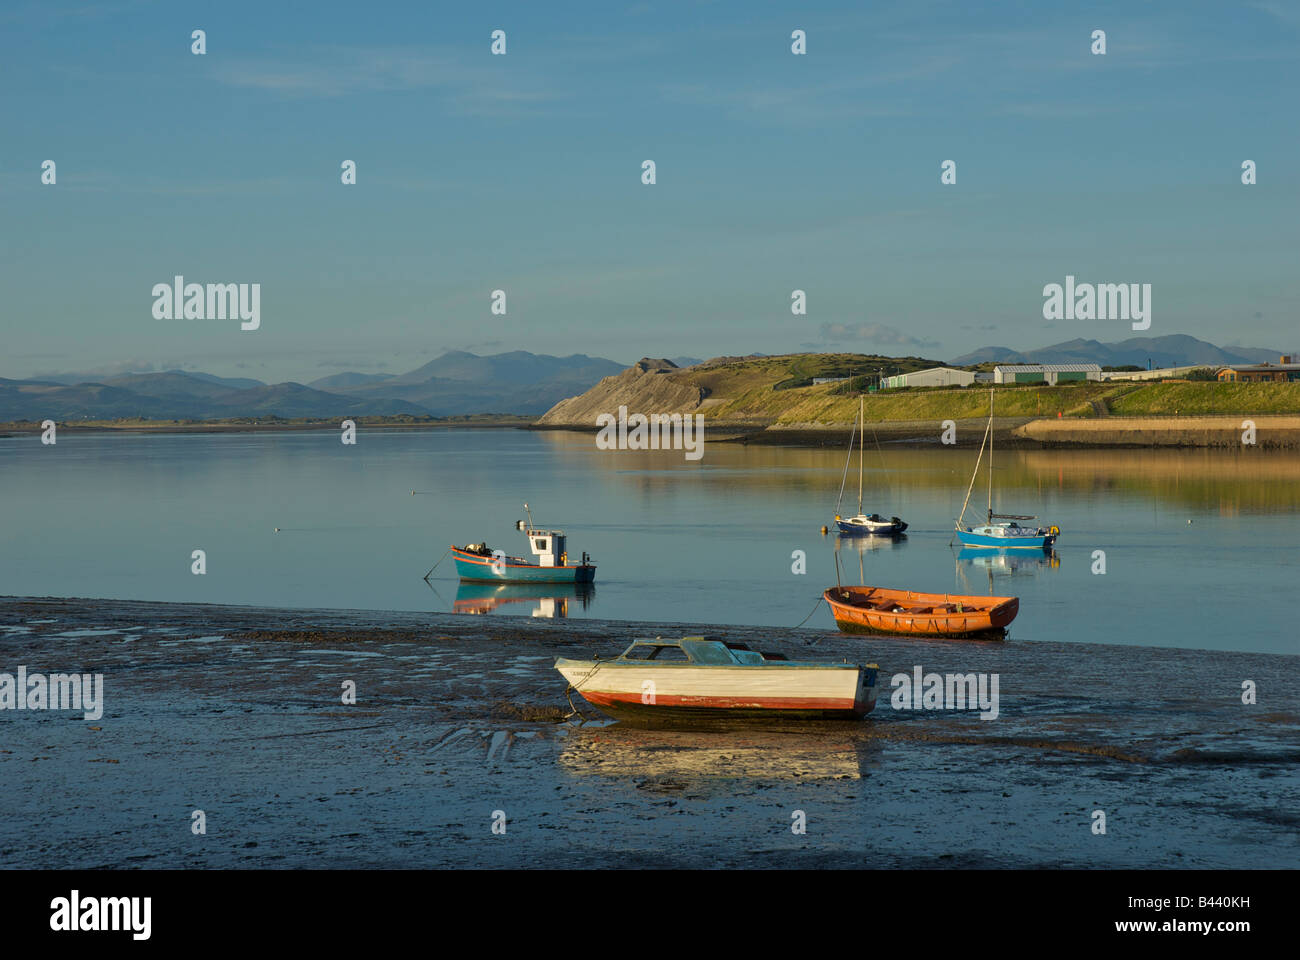 Boats in Walney Channel, between Walney Island and Barrow-in-Furness, Cumbria, England UK, with lakelsnd mills in the distance Stock Photo